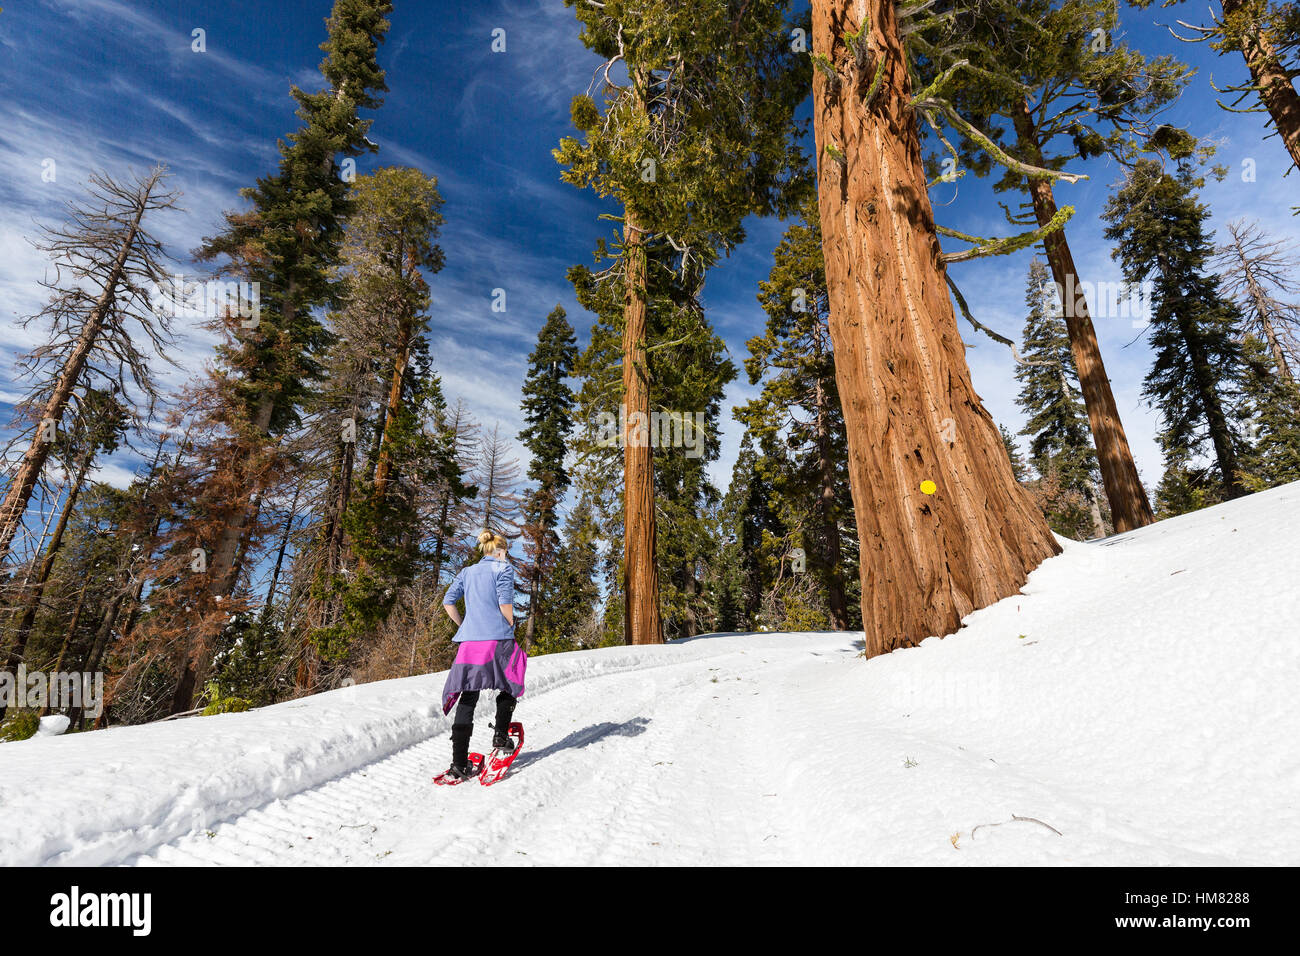 A woman snowshoes along a snow-covered winter trail next to a massive redwood tree in Kings Canyon National Park. Stock Photo